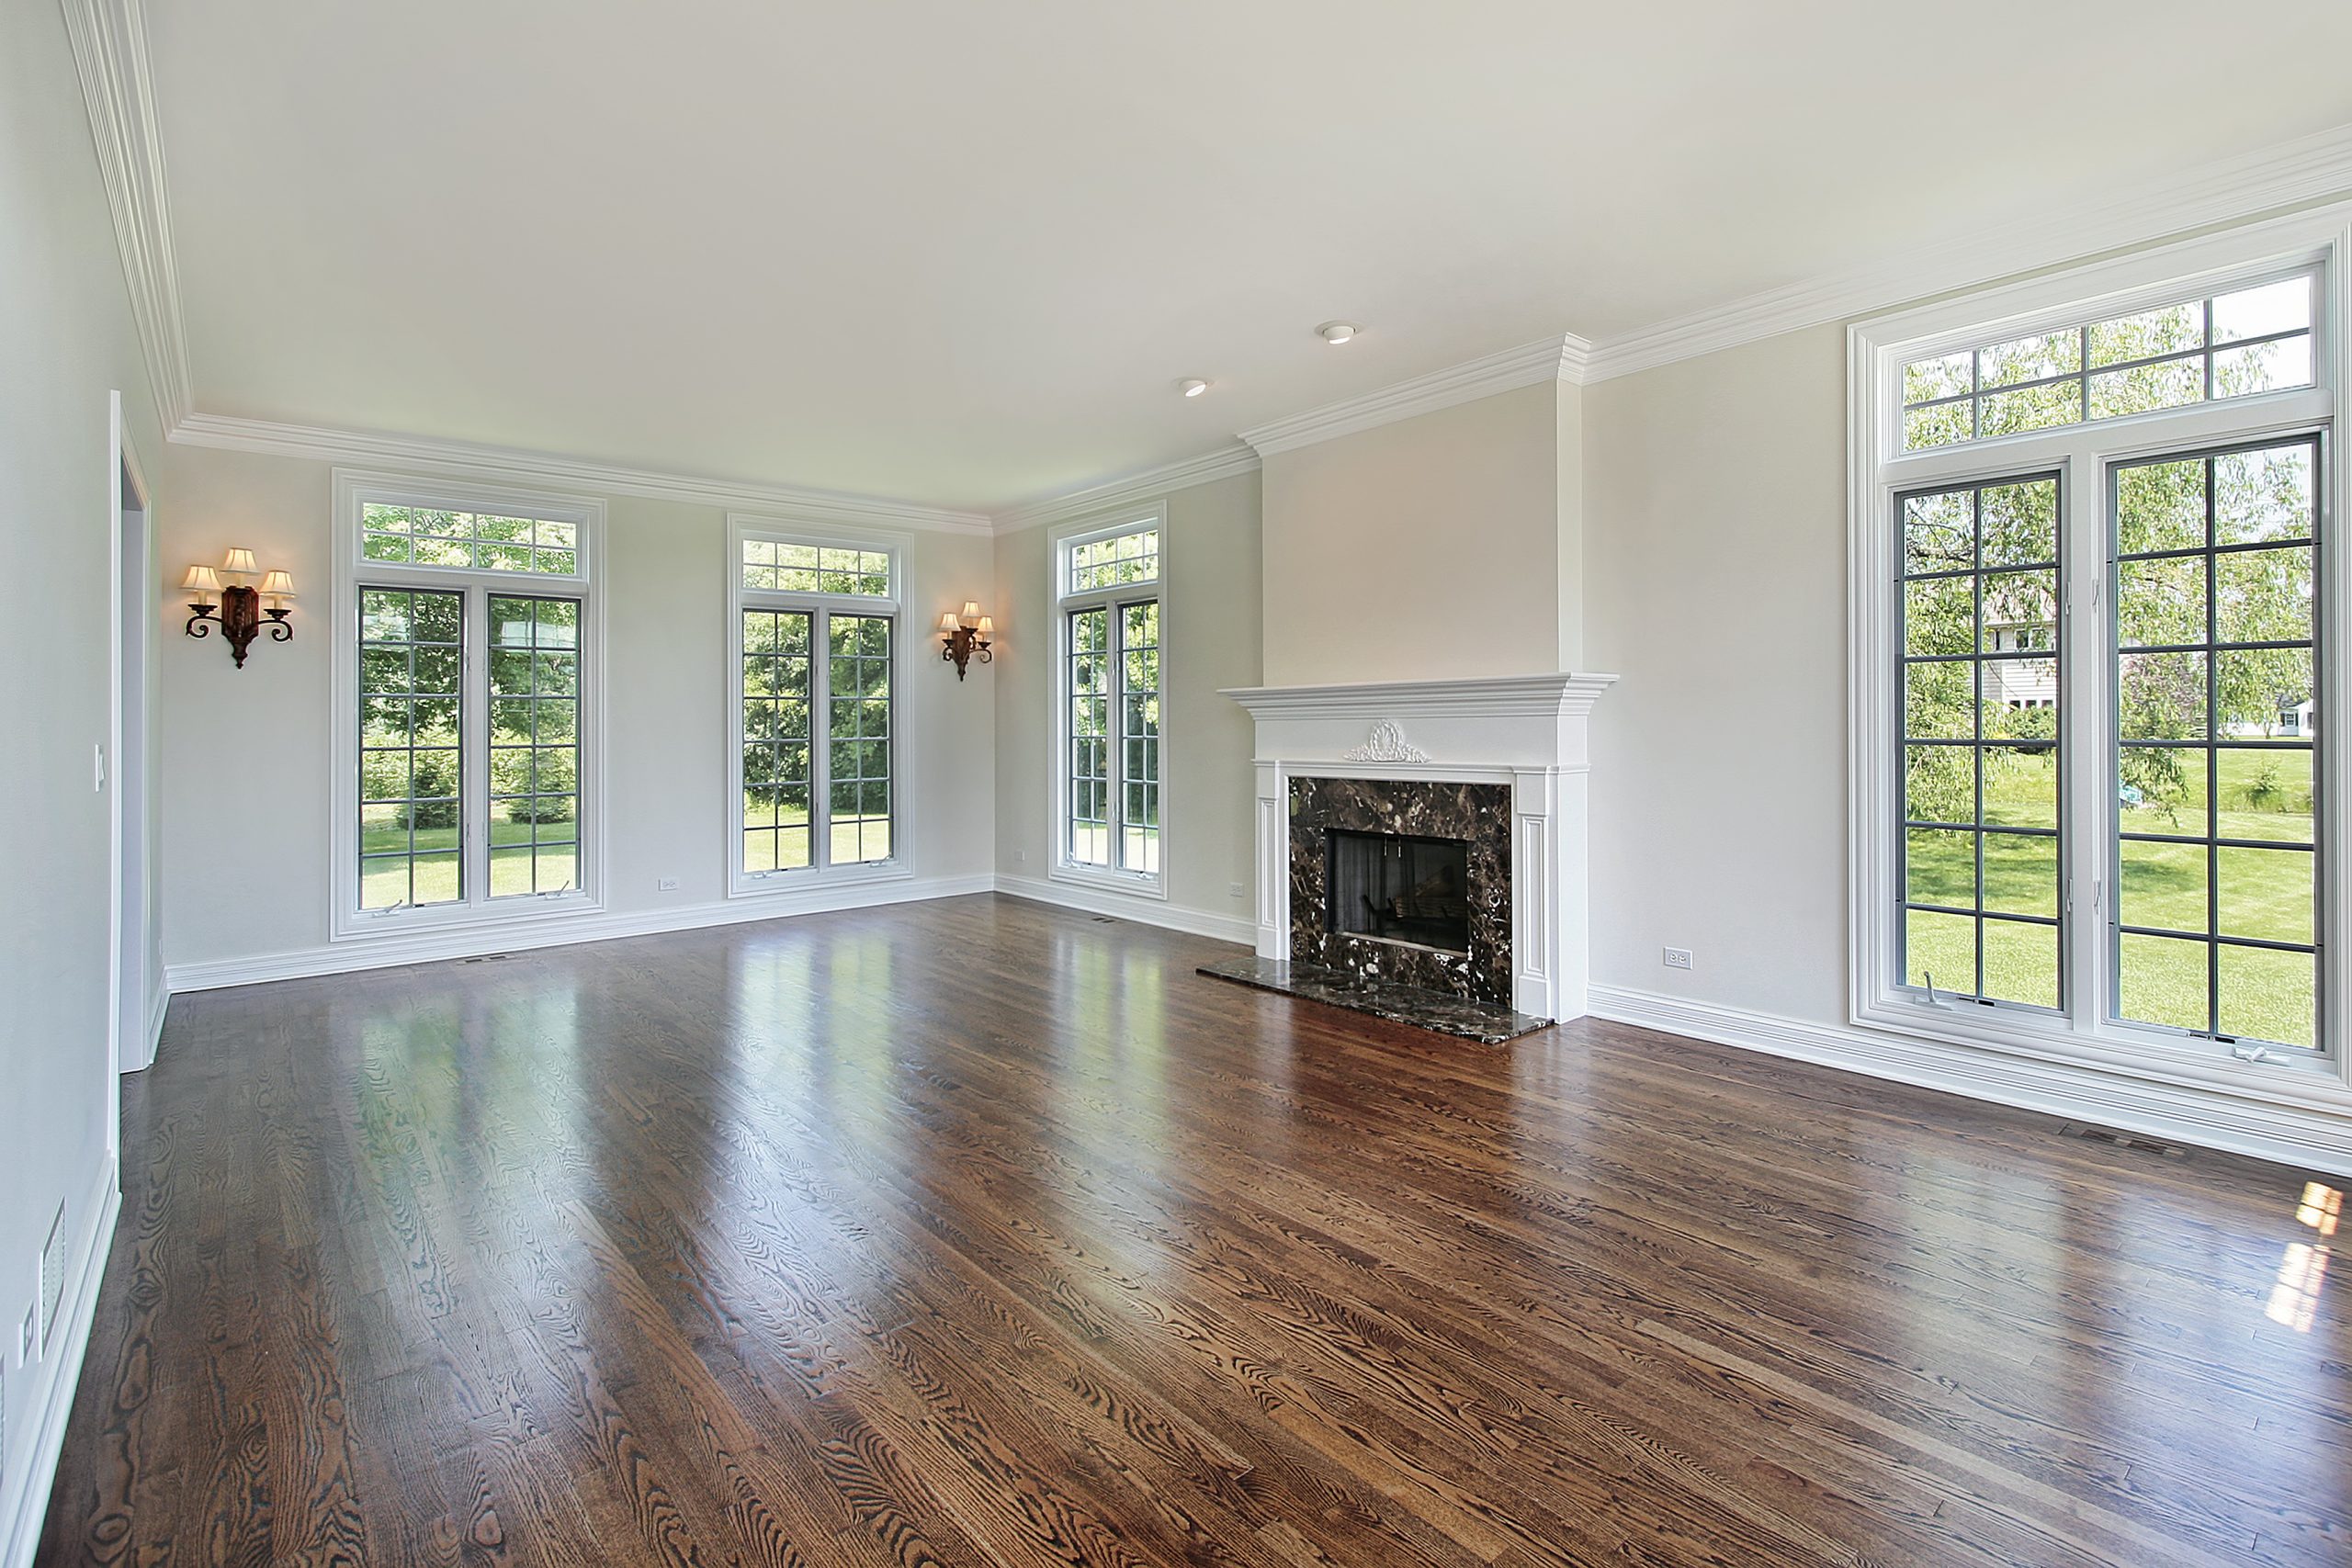 Diffe Types Of Polyurethane Finishes, How To Clean Hardwood Floors With Polyurethane Finish